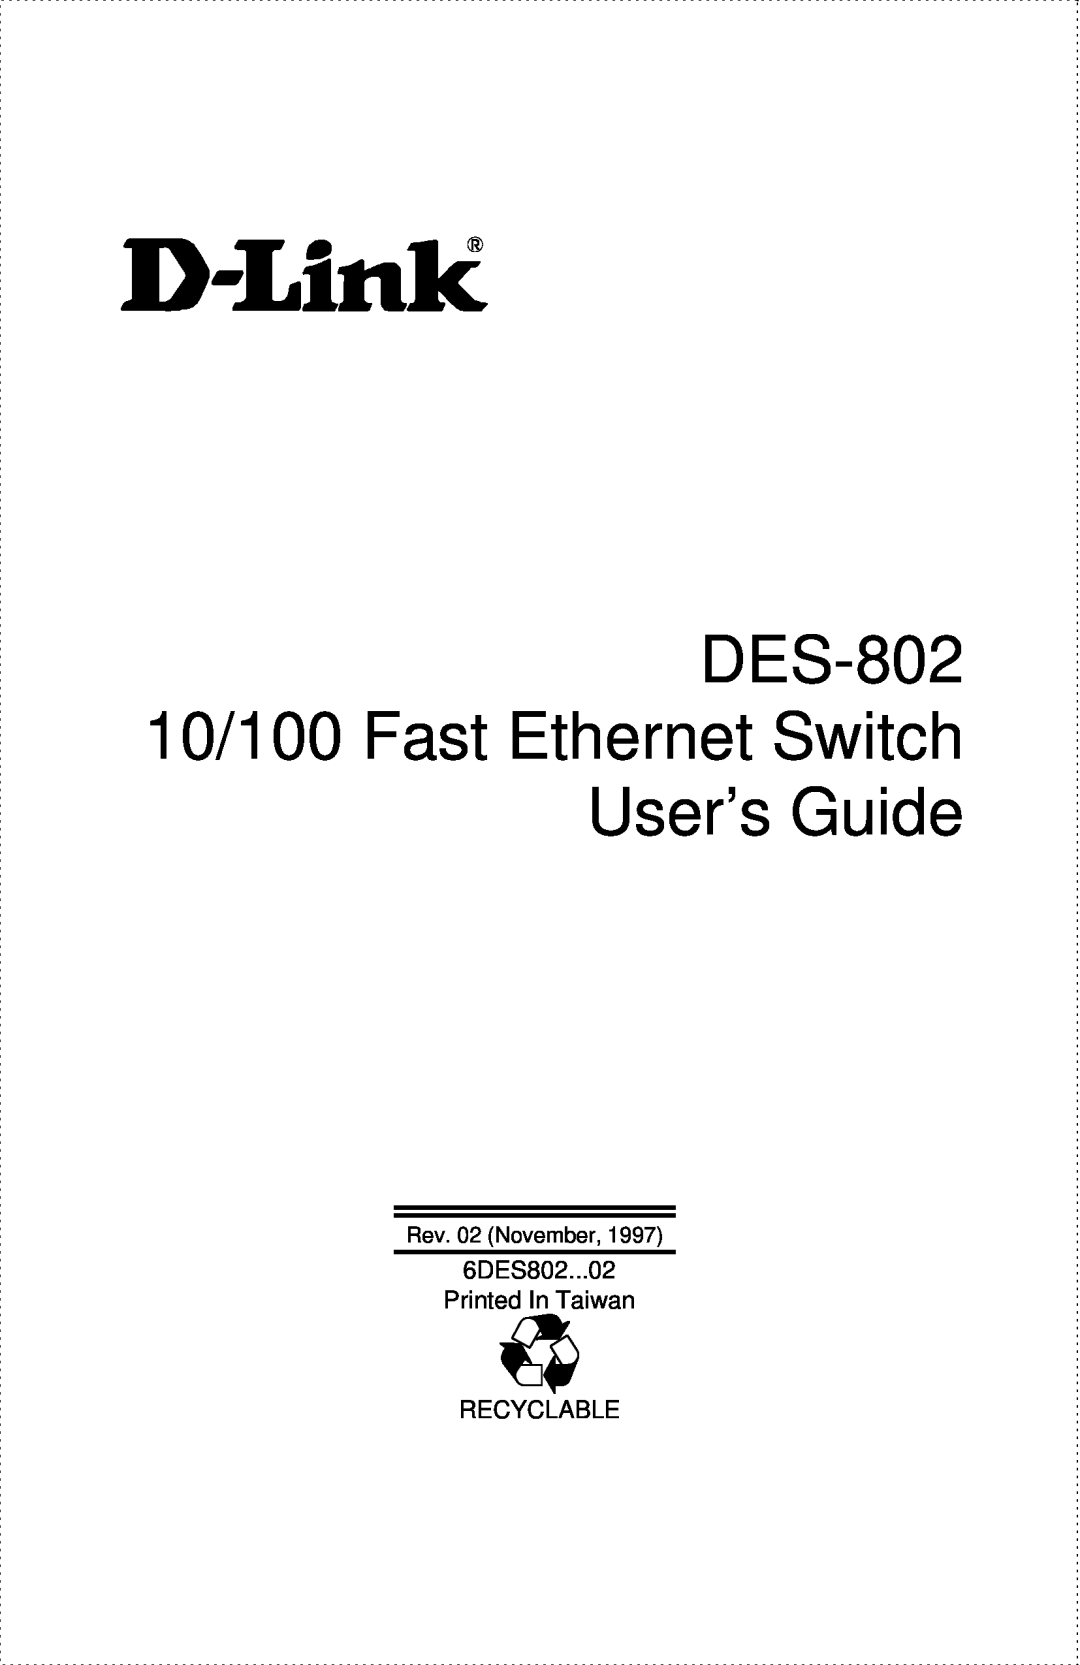 D-Link manual DES-802 10/100 Fast Ethernet Switch User’s Guide, 6DES802...02 Printed In Taiwan, Recyclable 